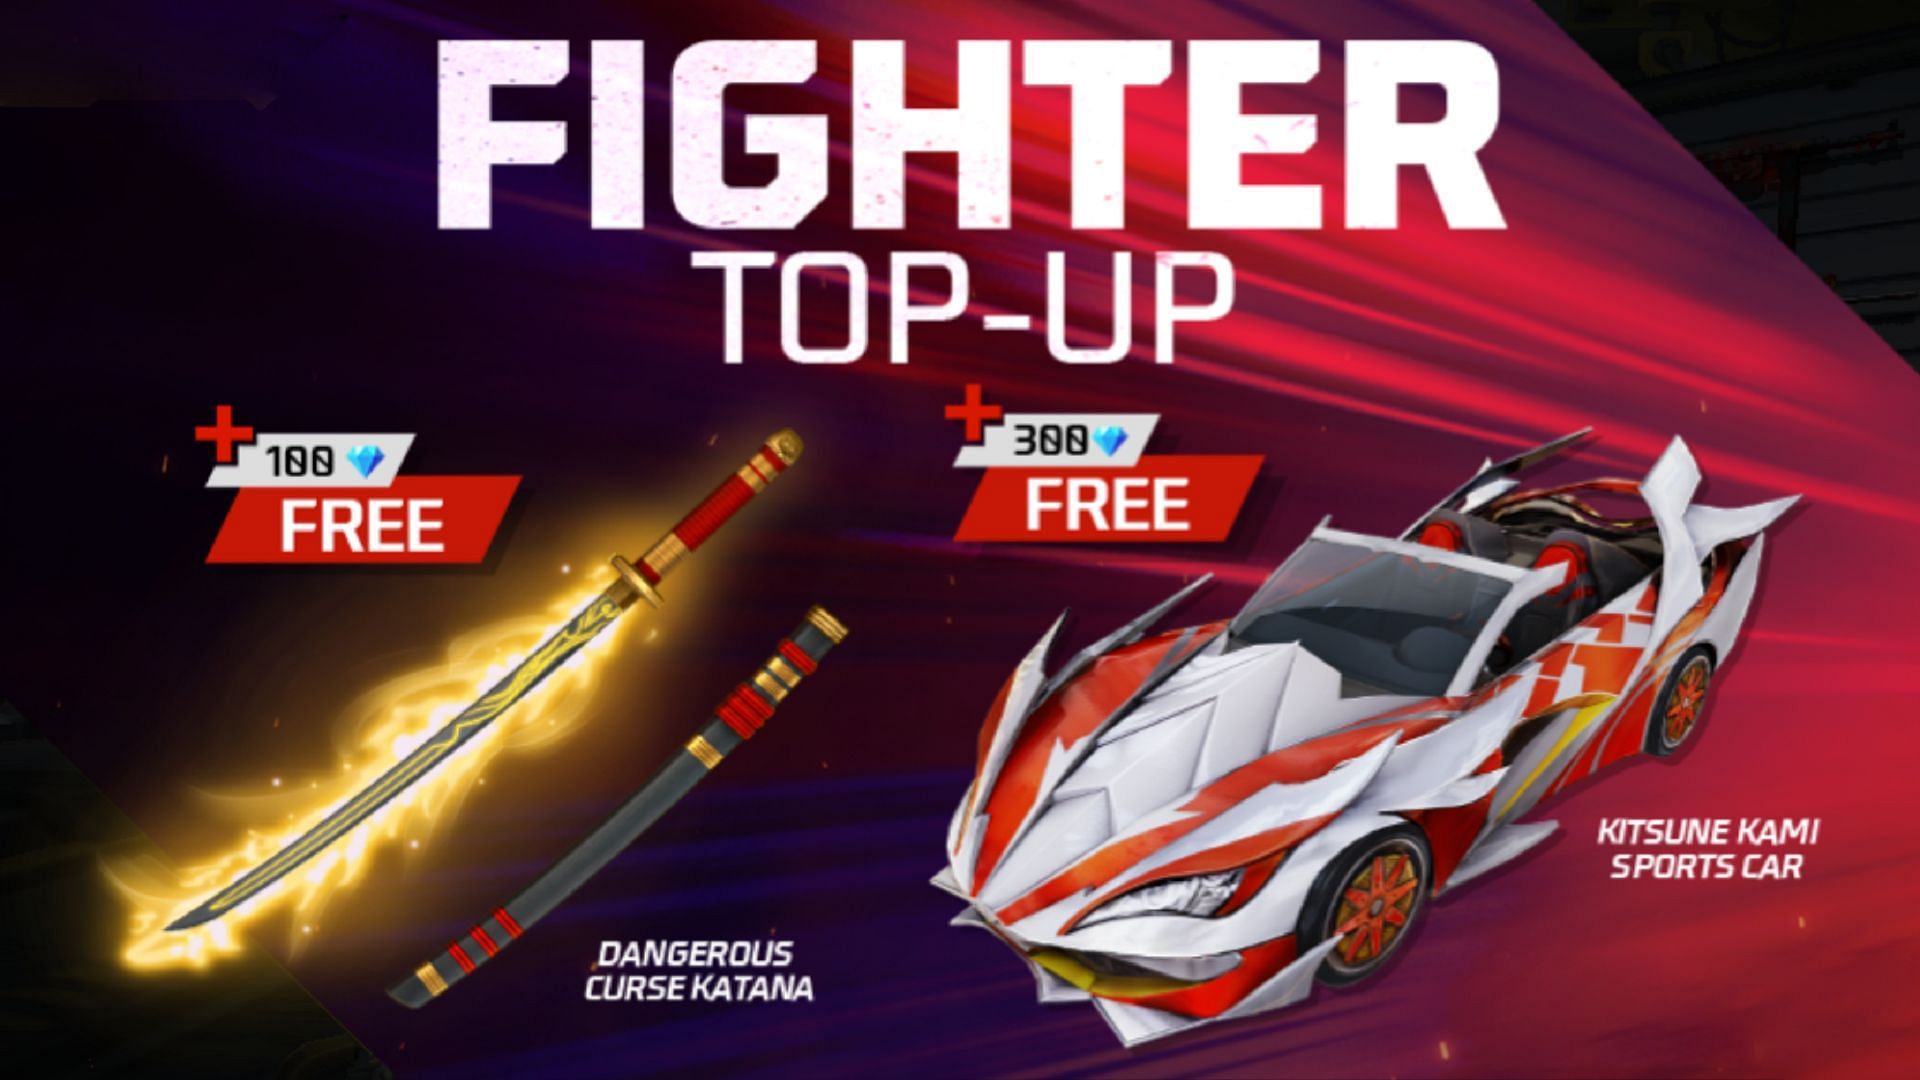 New Fighter Top-Up event is available in Free Fire MAX (Image via Garena)